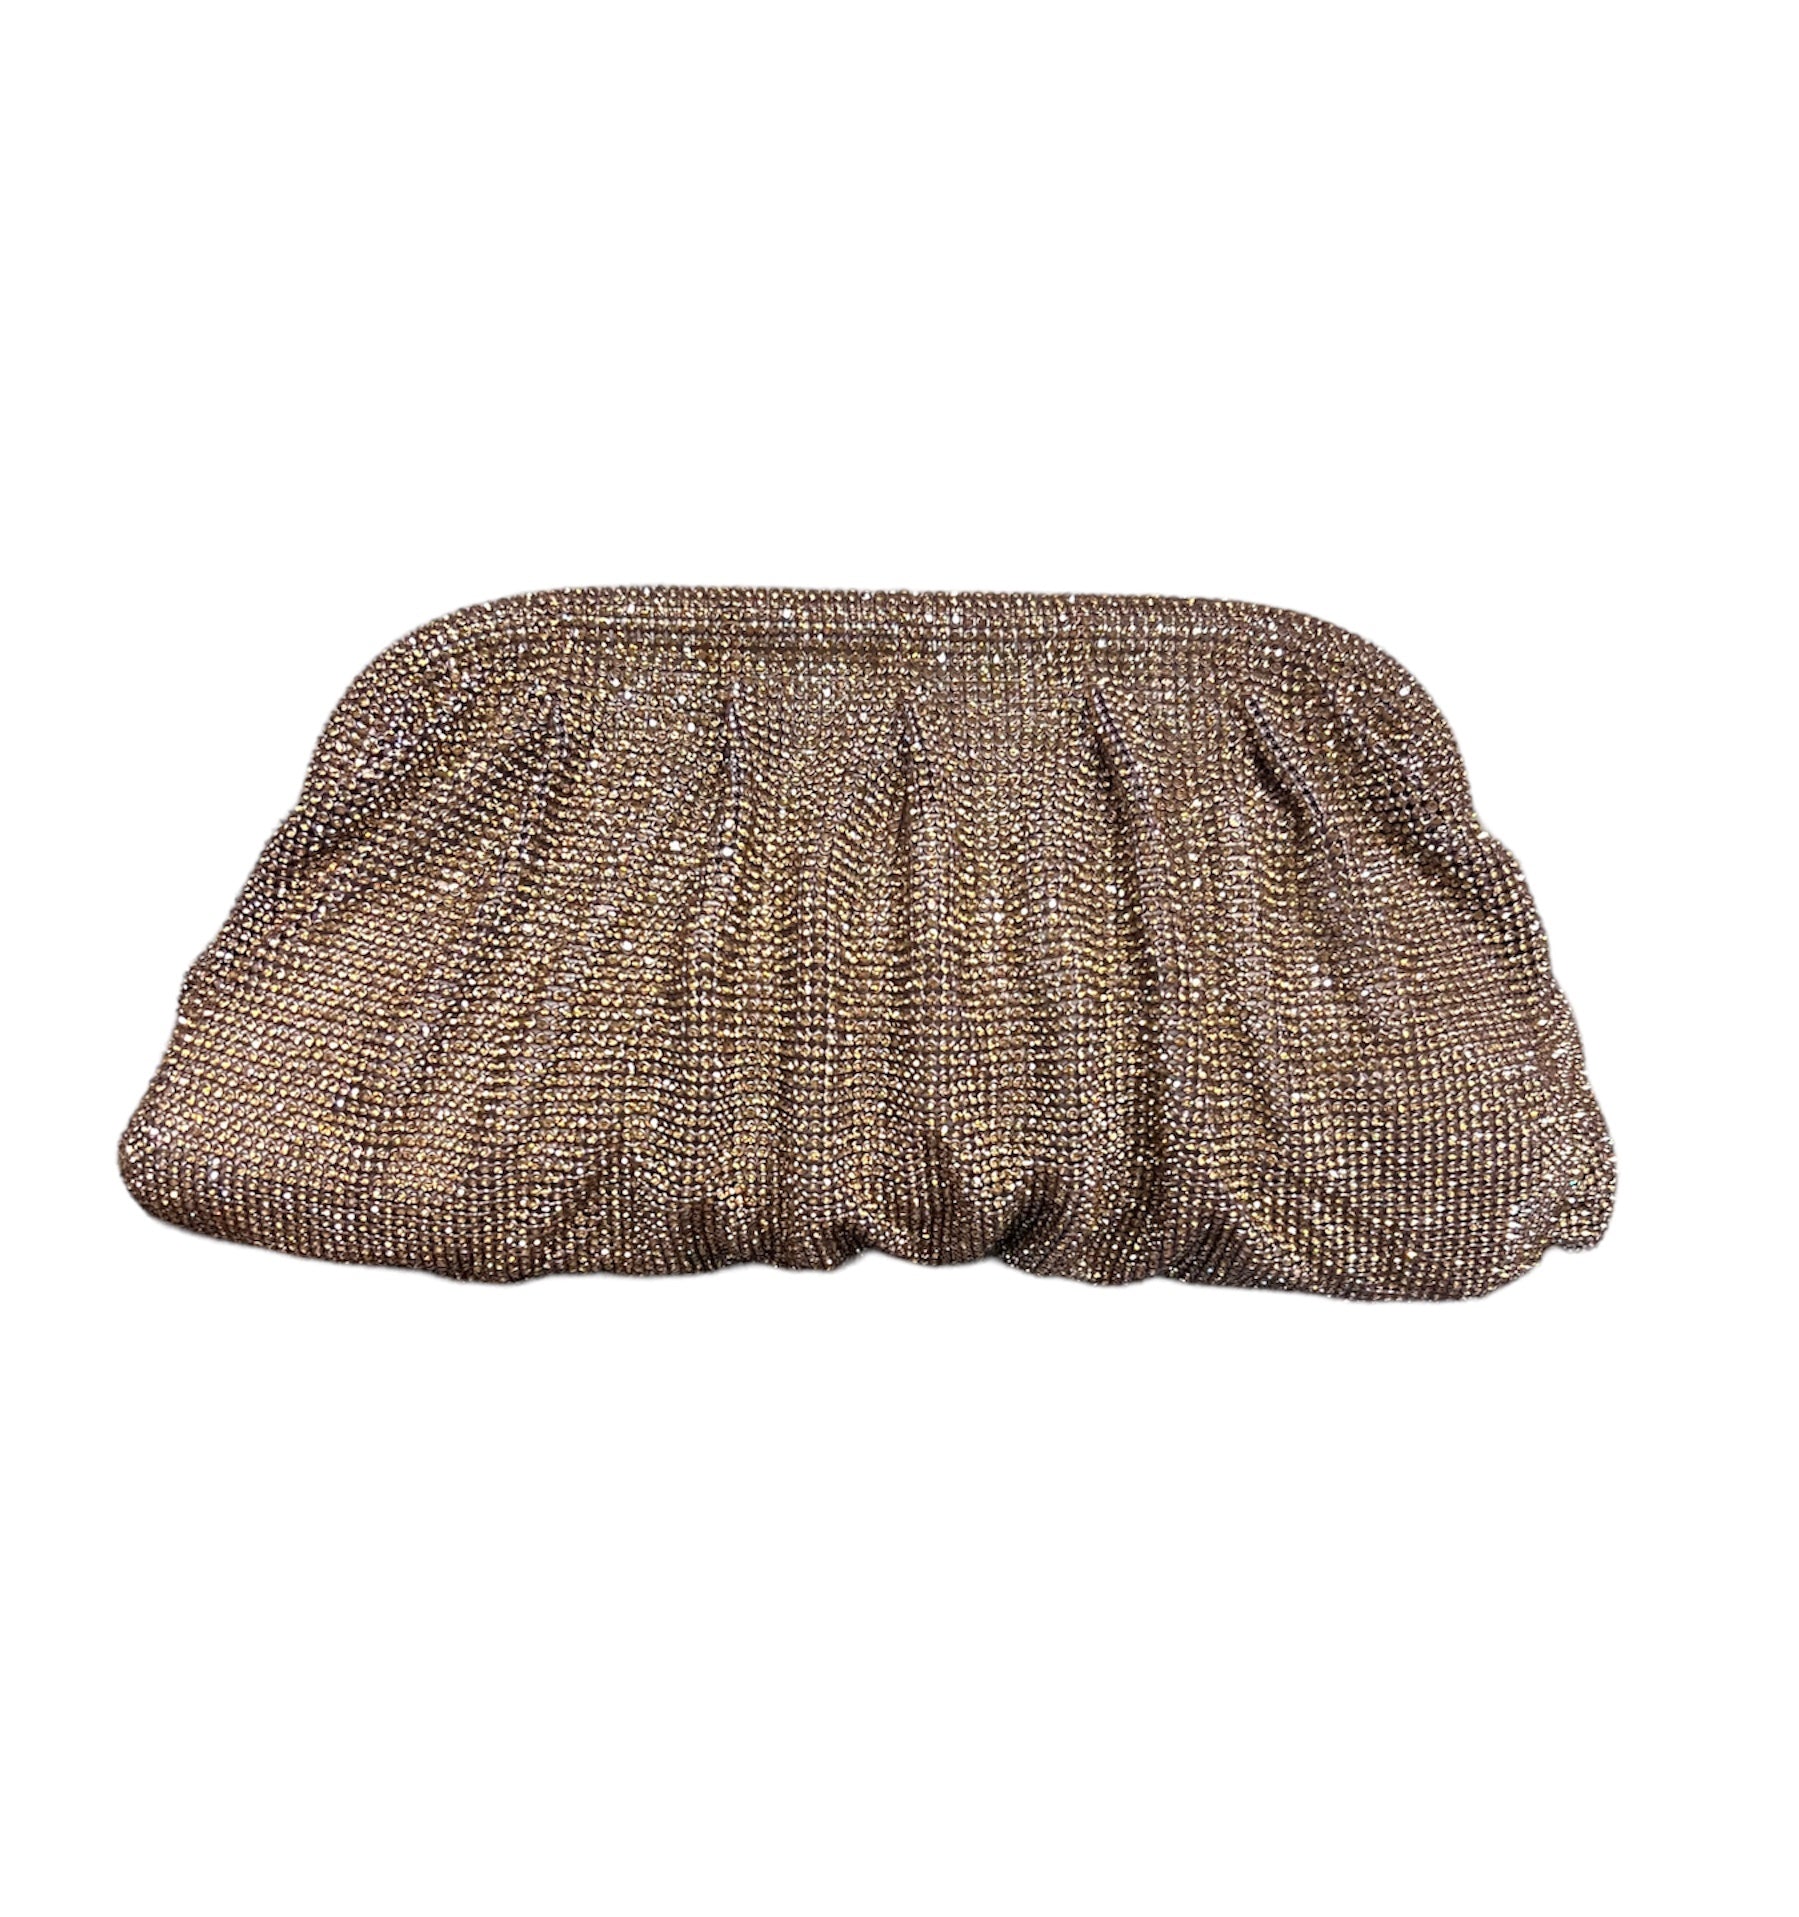 GOLD CRYSTALLIZED CLUTCH